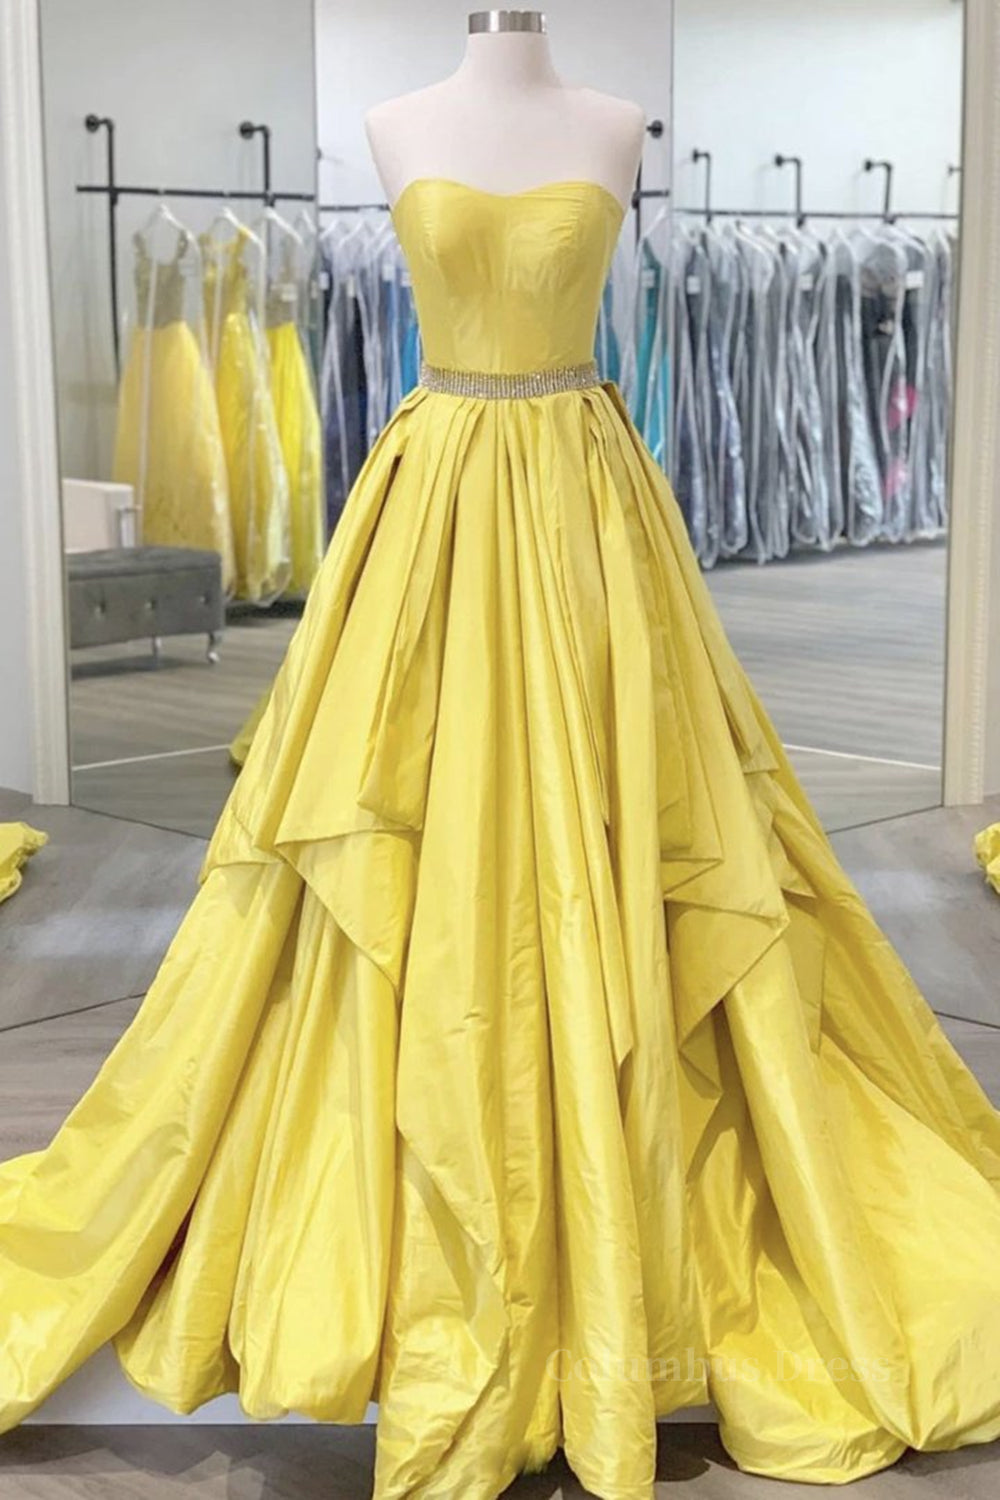 Strapless Open Back Fluffy Yellow Satin Long Corset Prom Dress, Layered Yellow Corset Formal Evening Dress outfit, Evening Dress For Weddings